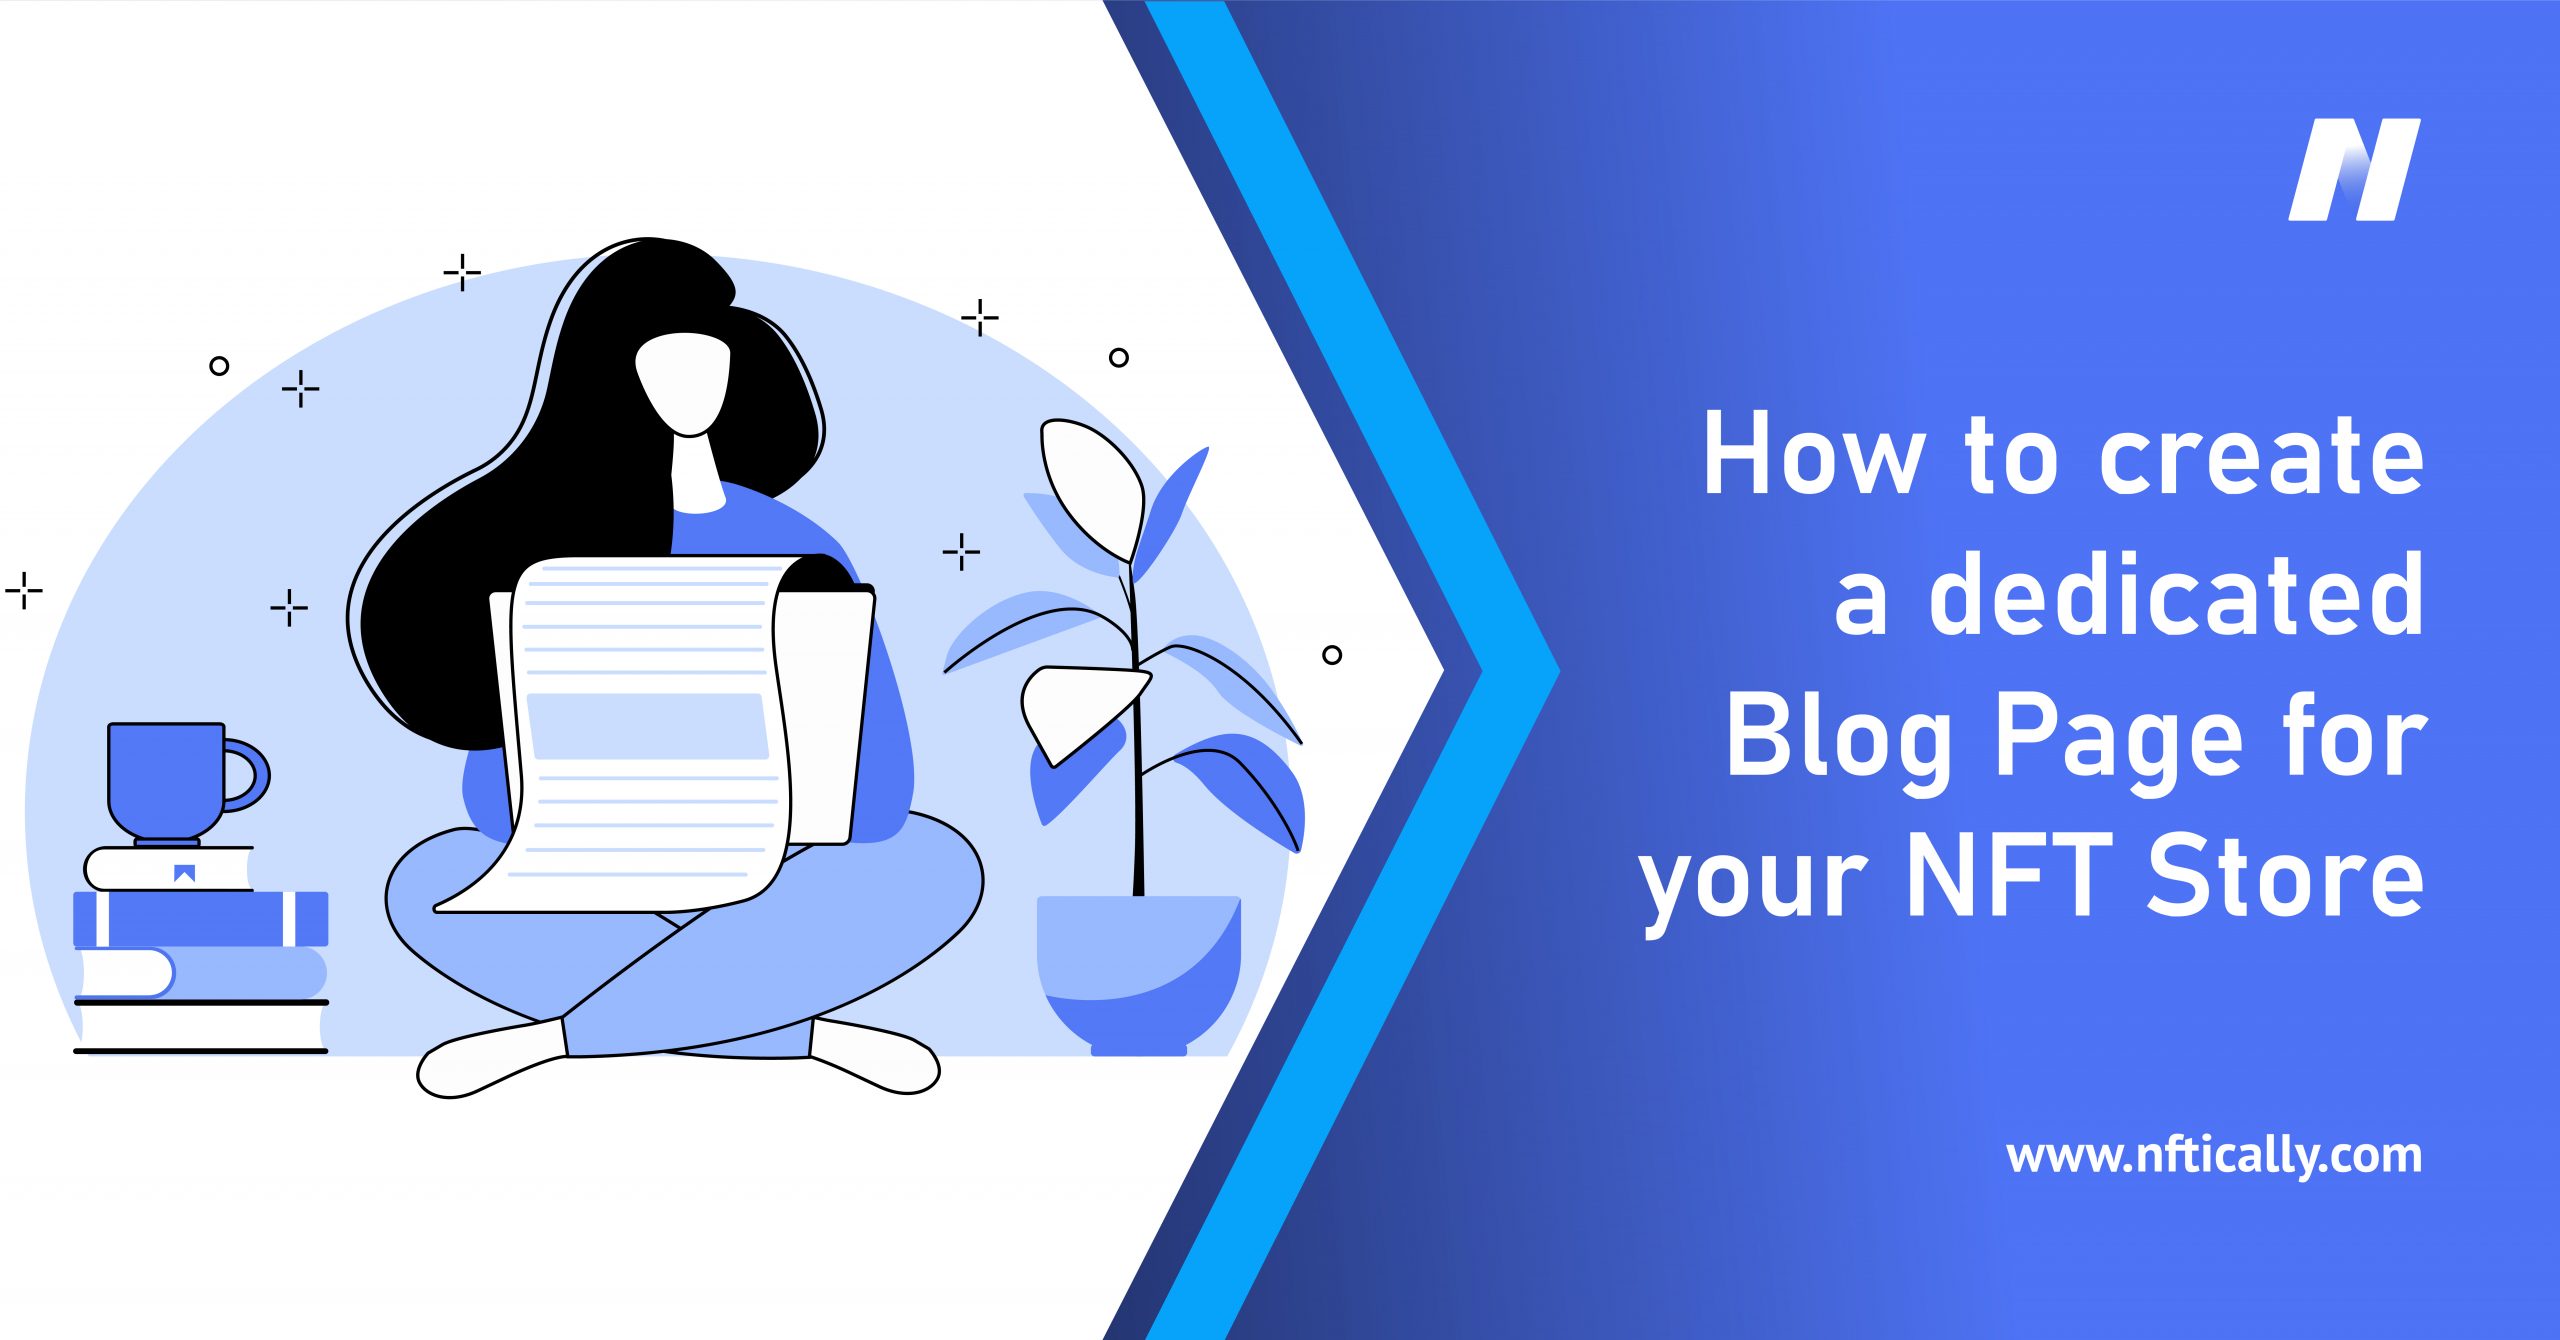 How to create a dedicated Blog Page for your NFT Store